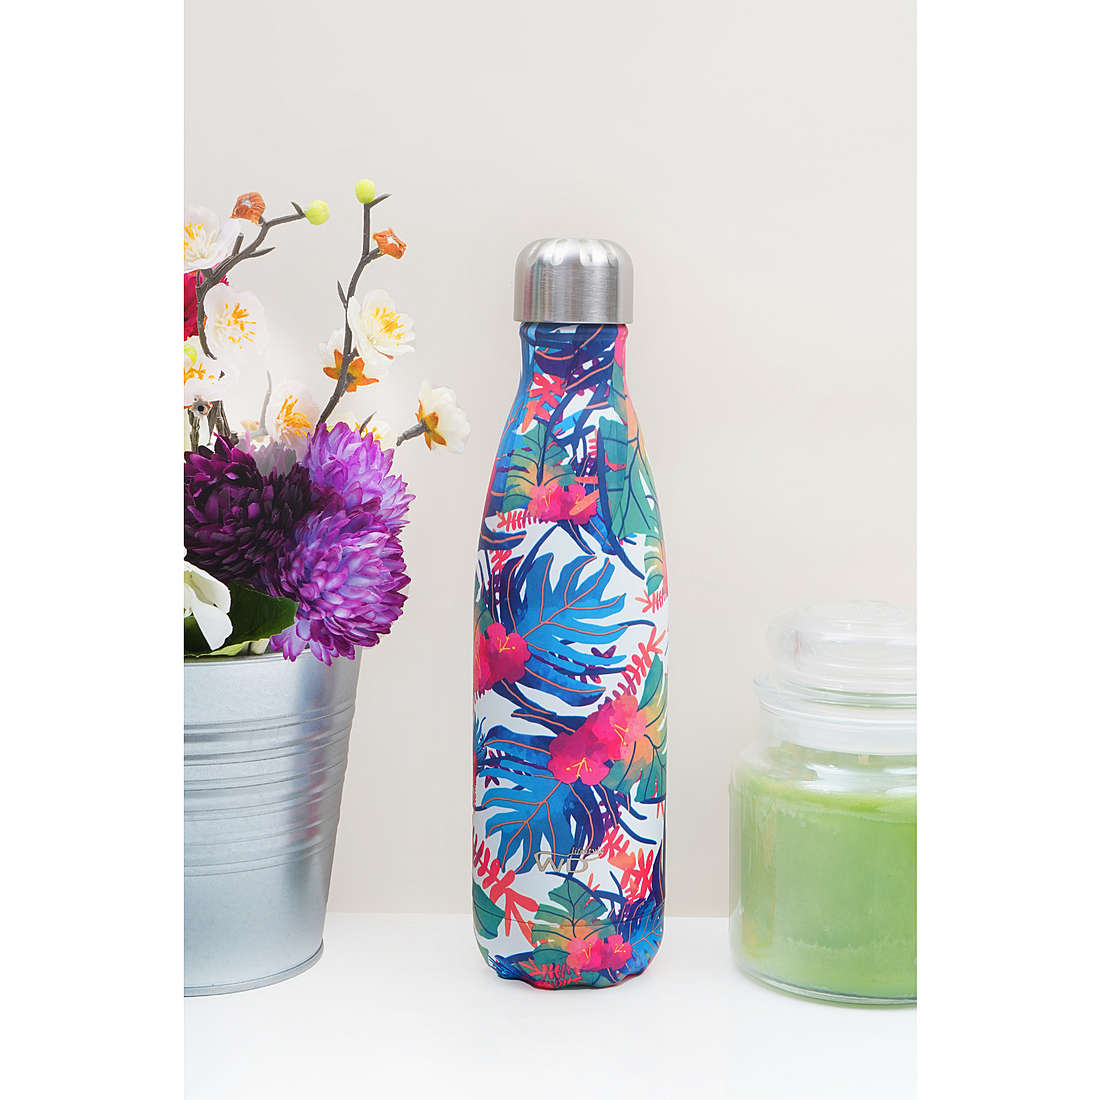 Selezione GioiaPura bottles Wd Lifestyle ND WD365TROPICAL wearing